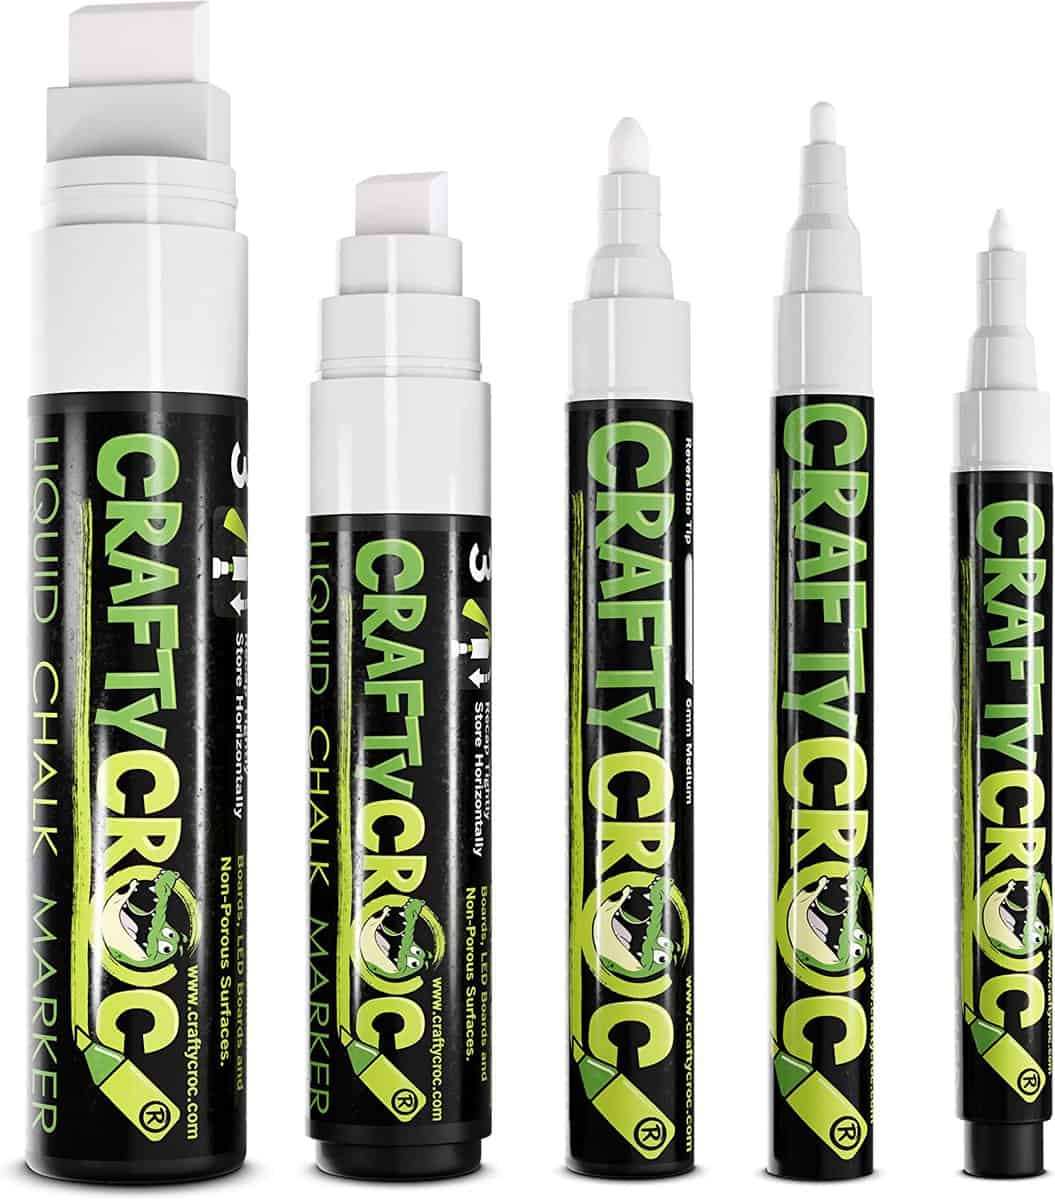 Fine Tip Chalk Markers - 4 White Colors